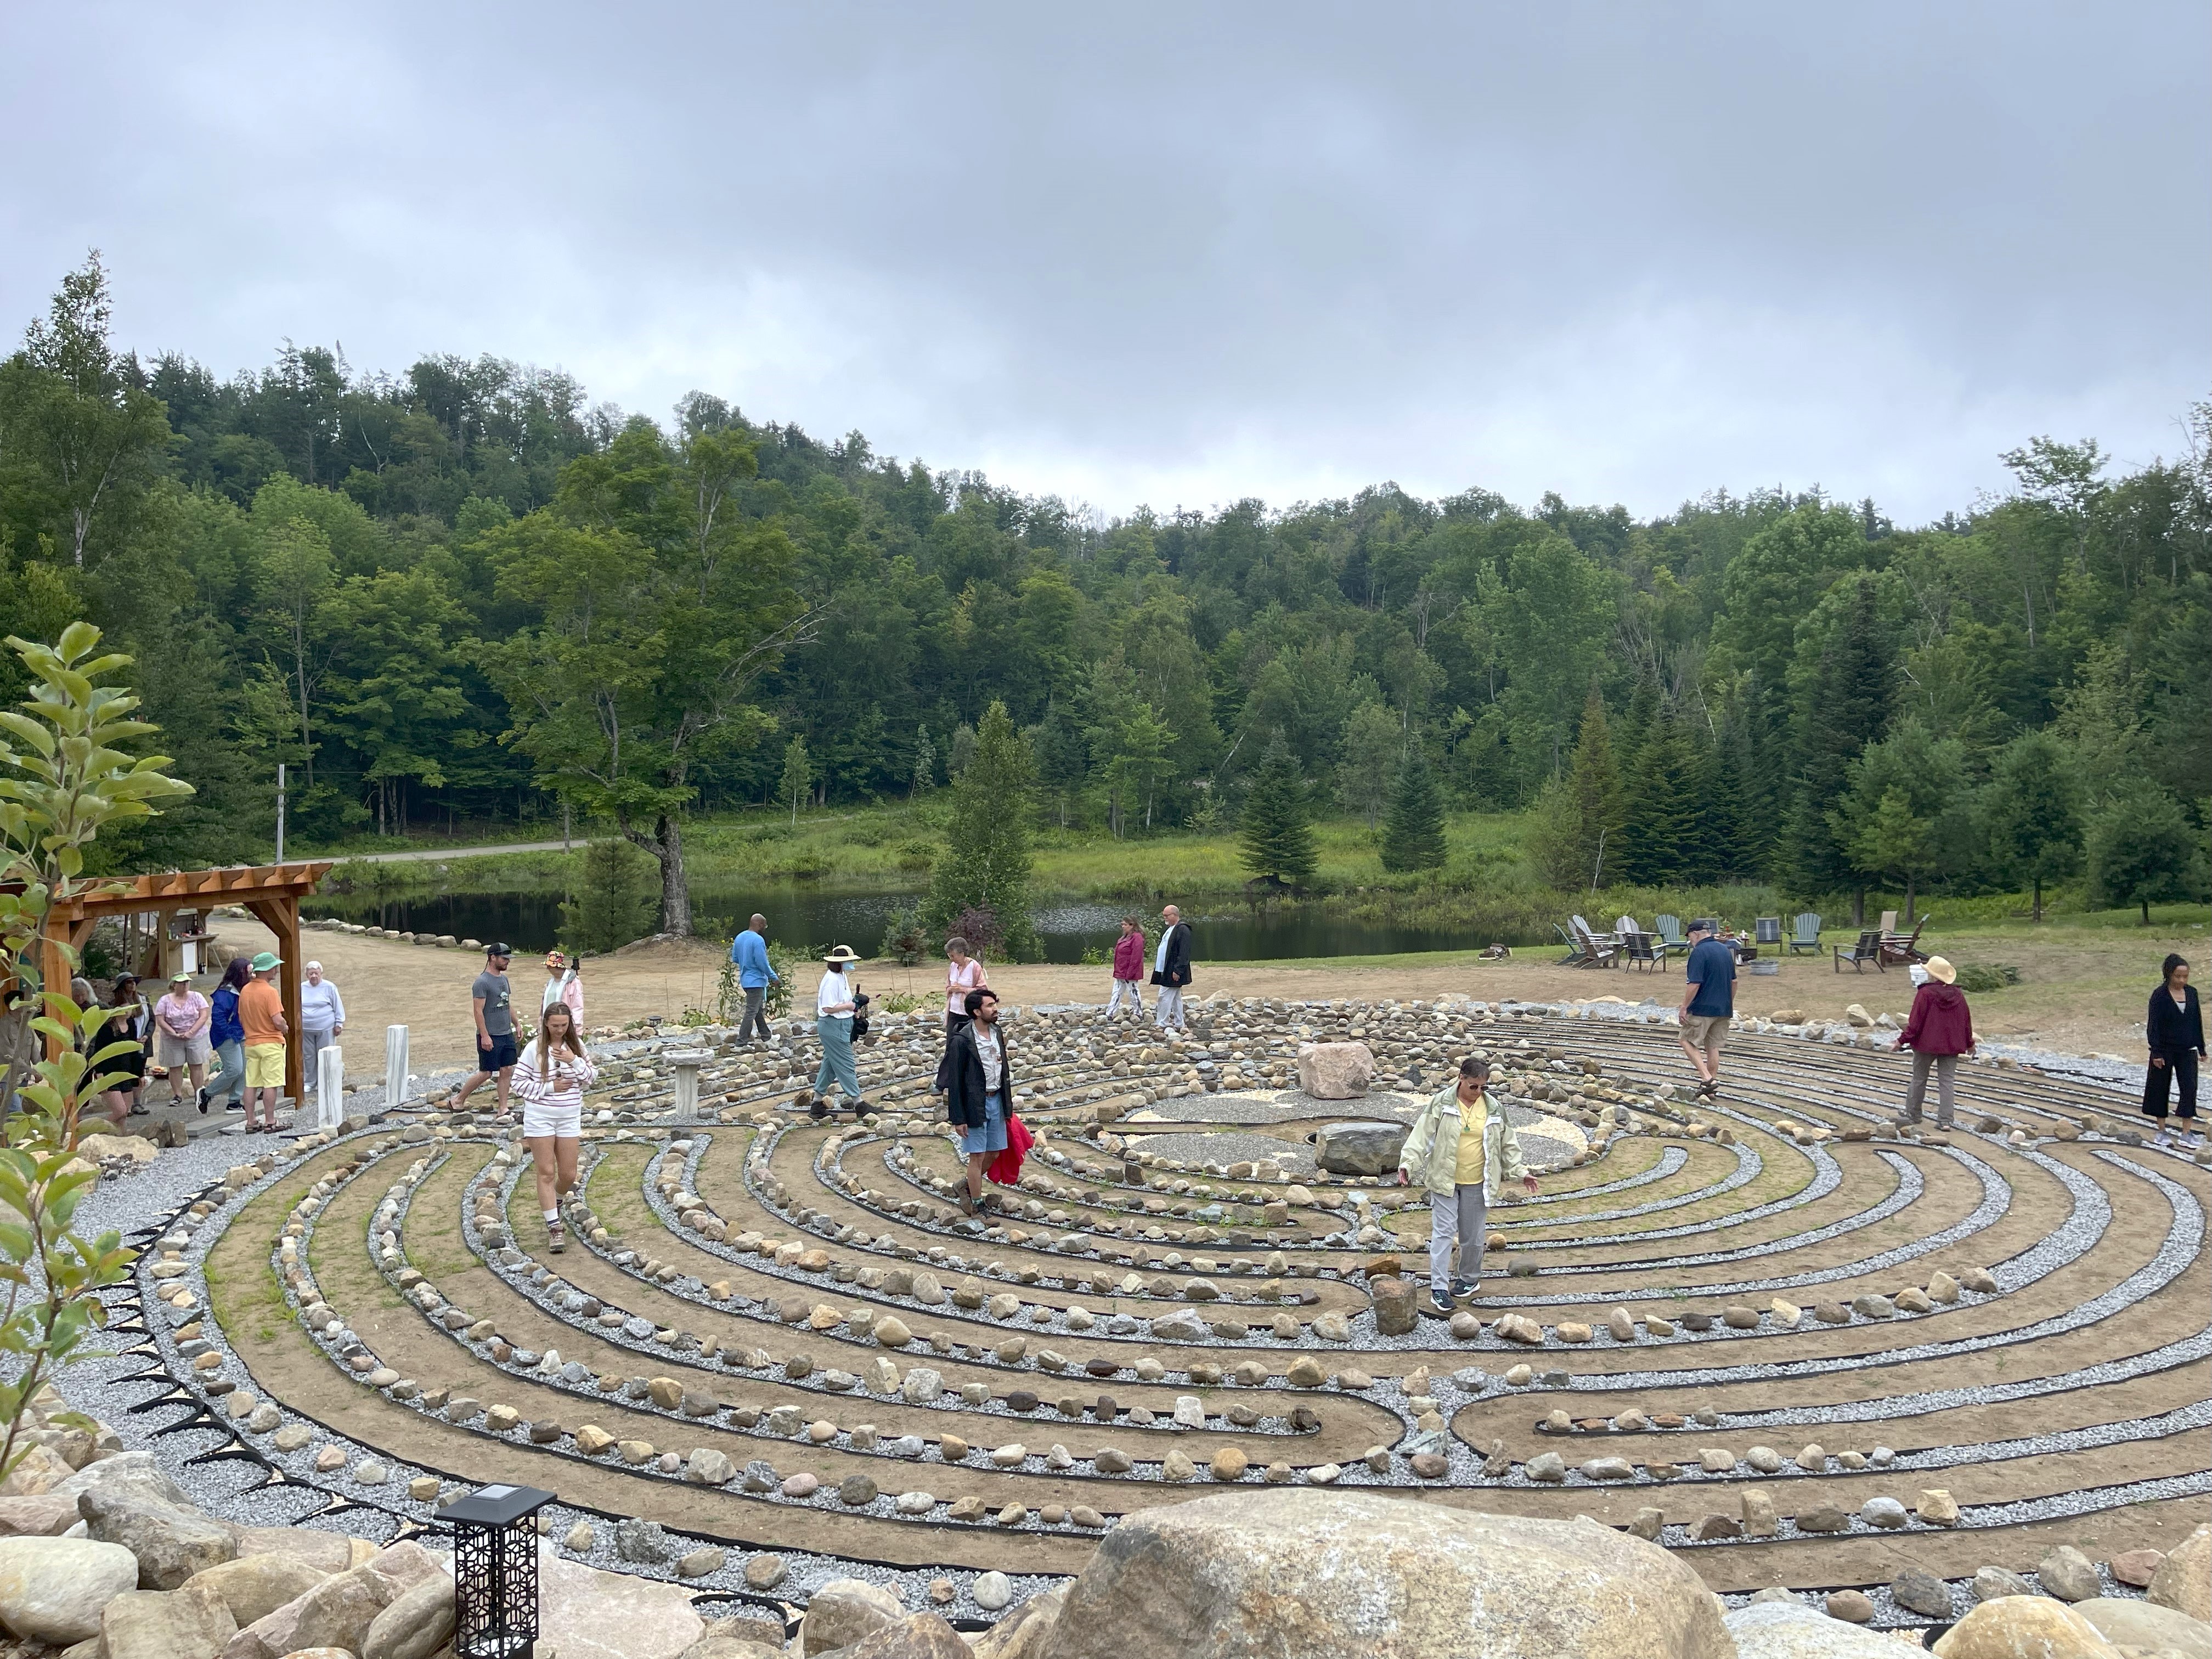 Labyrinth Attraction opens in the Adirondacks